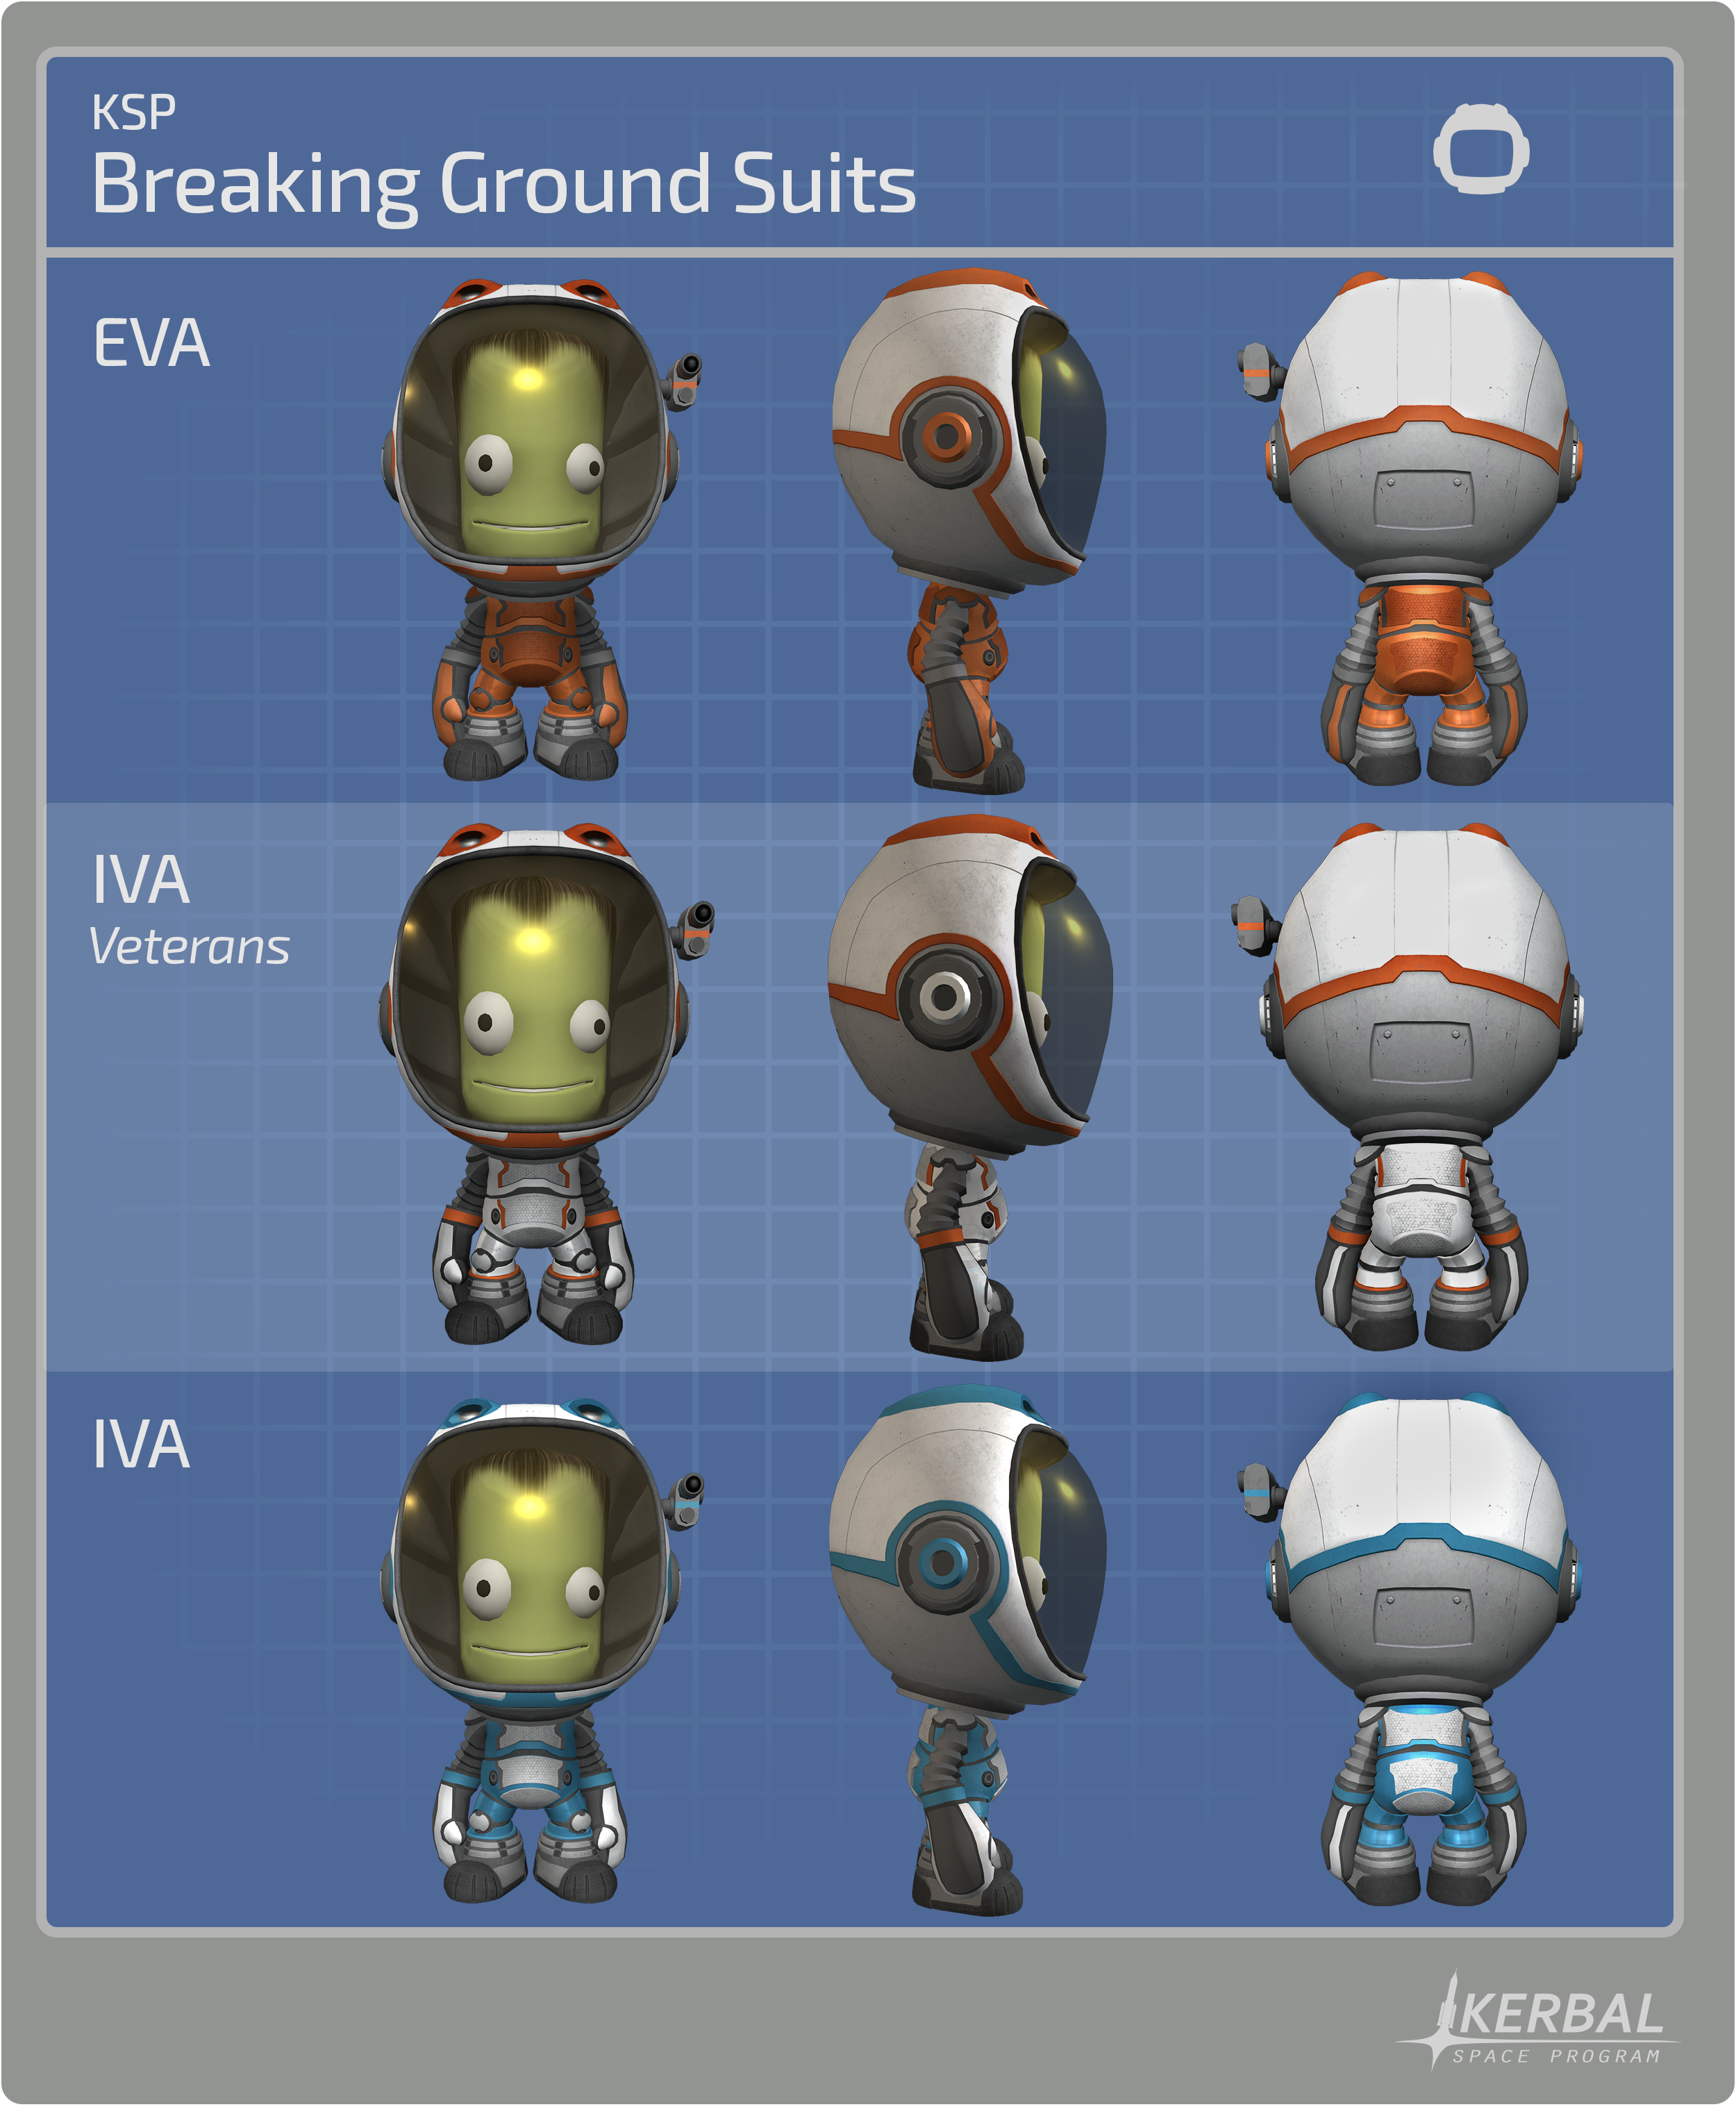 Deployed ground solar panels as base power - KSP1 Mods Discussions - Kerbal  Space Program Forums